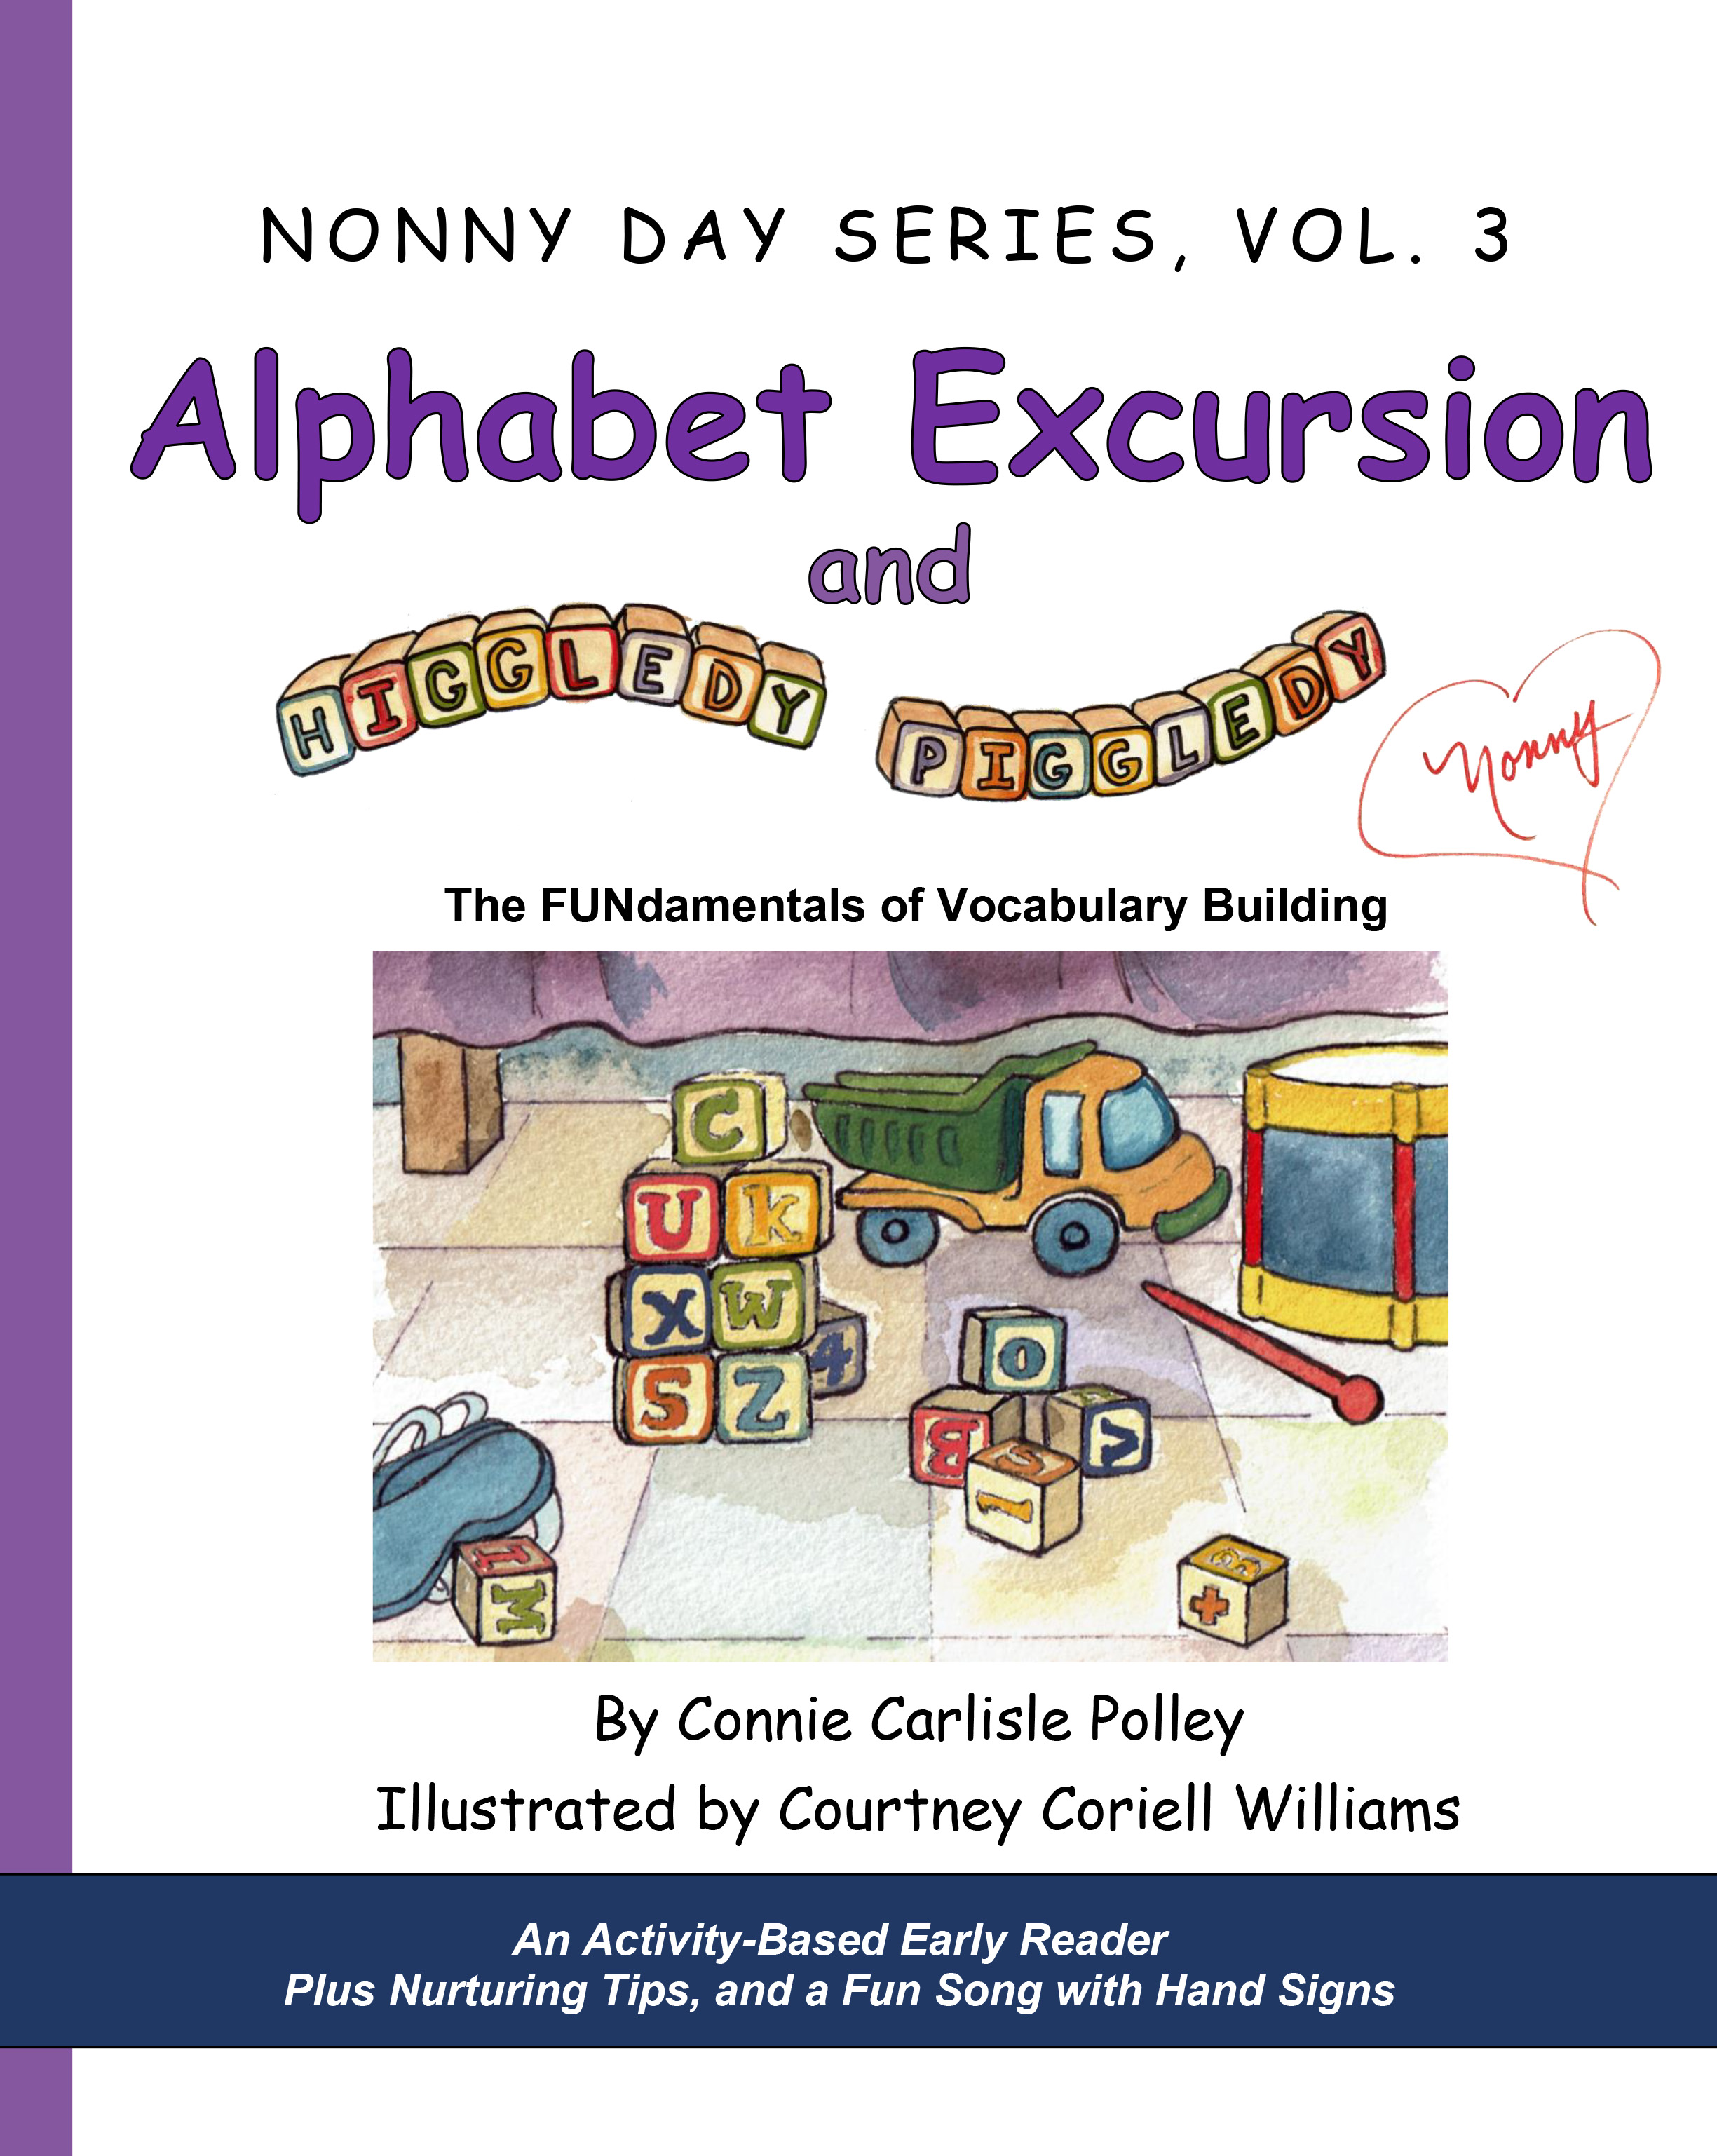 Front cover of Alphabet Excursion and Higgledy-Piggledy, By Connie Carlisle Polley, Illustrated by Courtney Coriell Williams